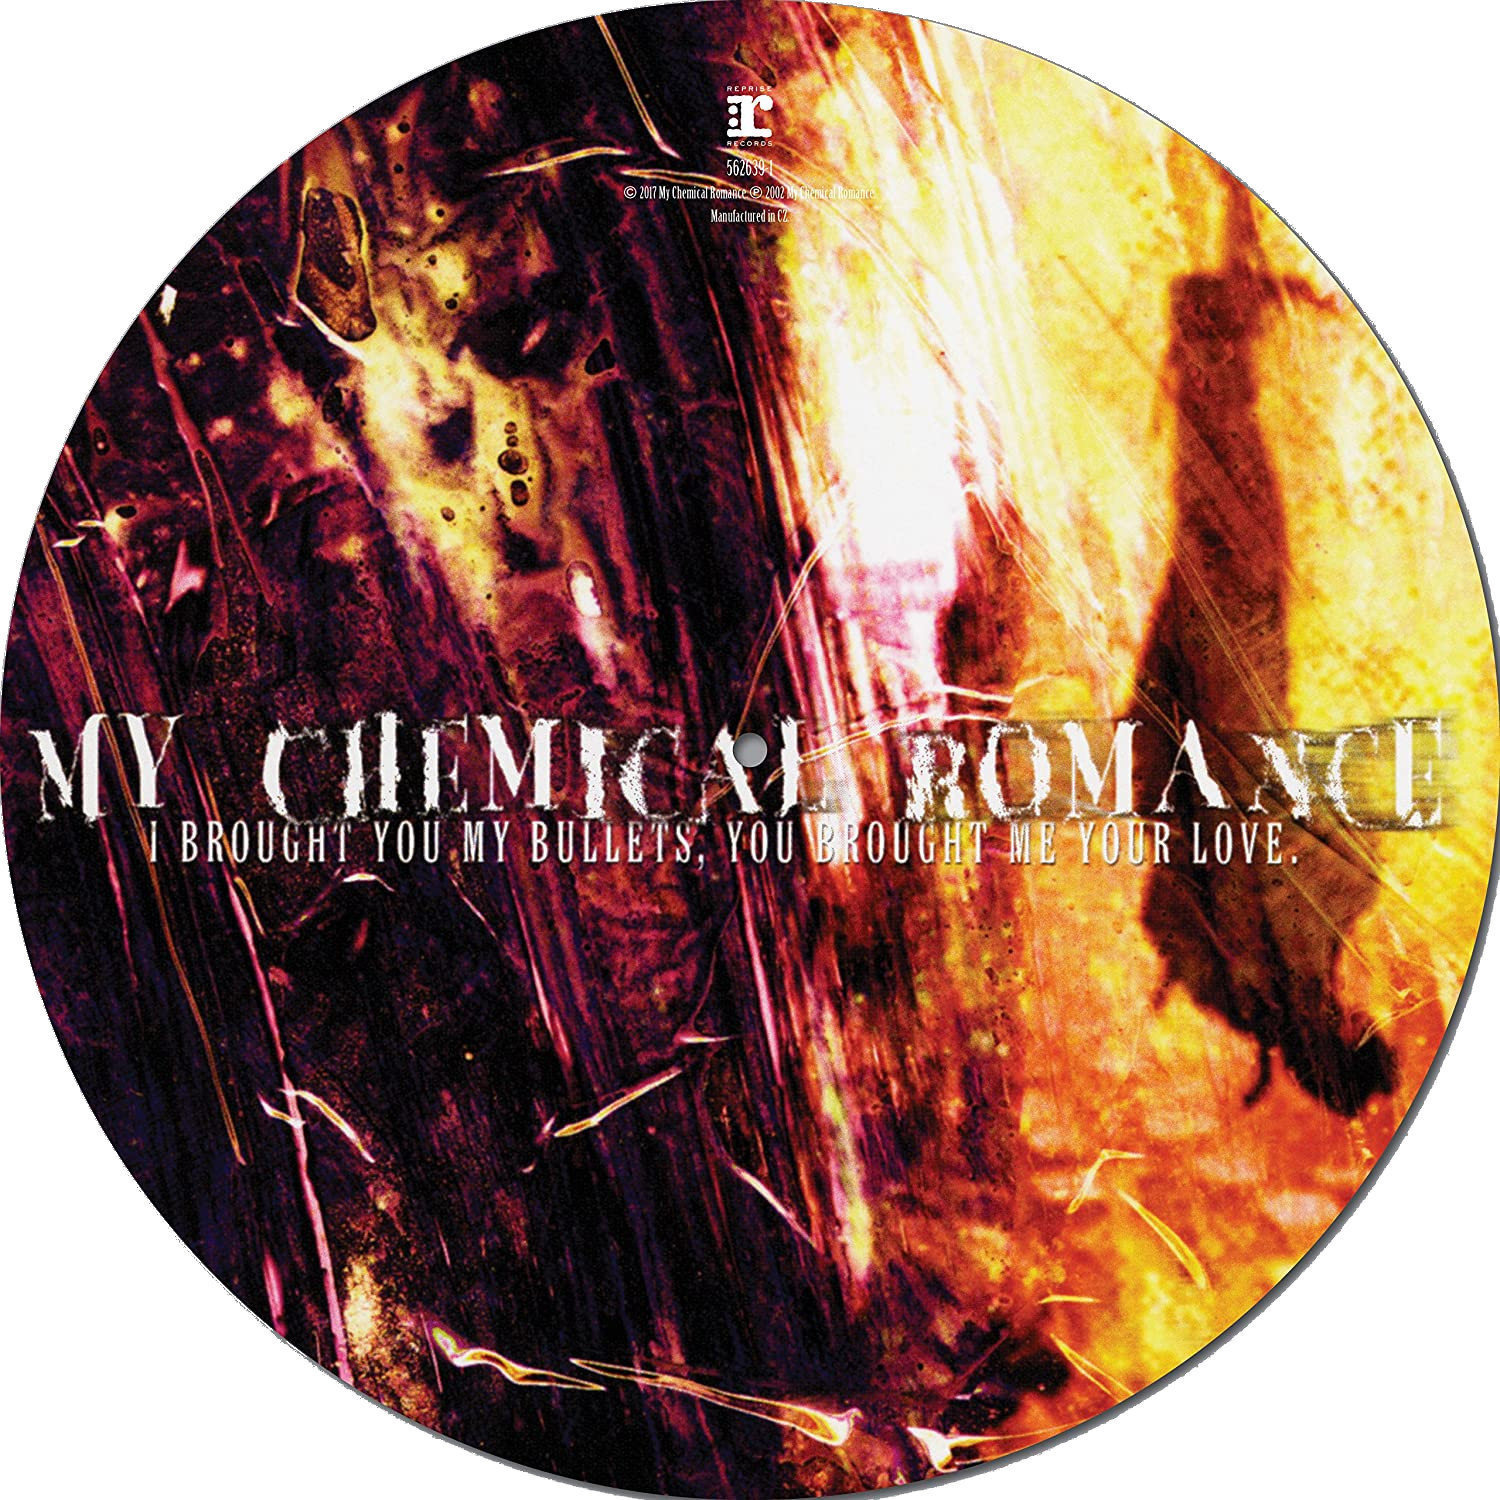 LP My Chemical Romance - I Brought You My Bullets, You Brought Me Your Love (Picture Disc) (LP)